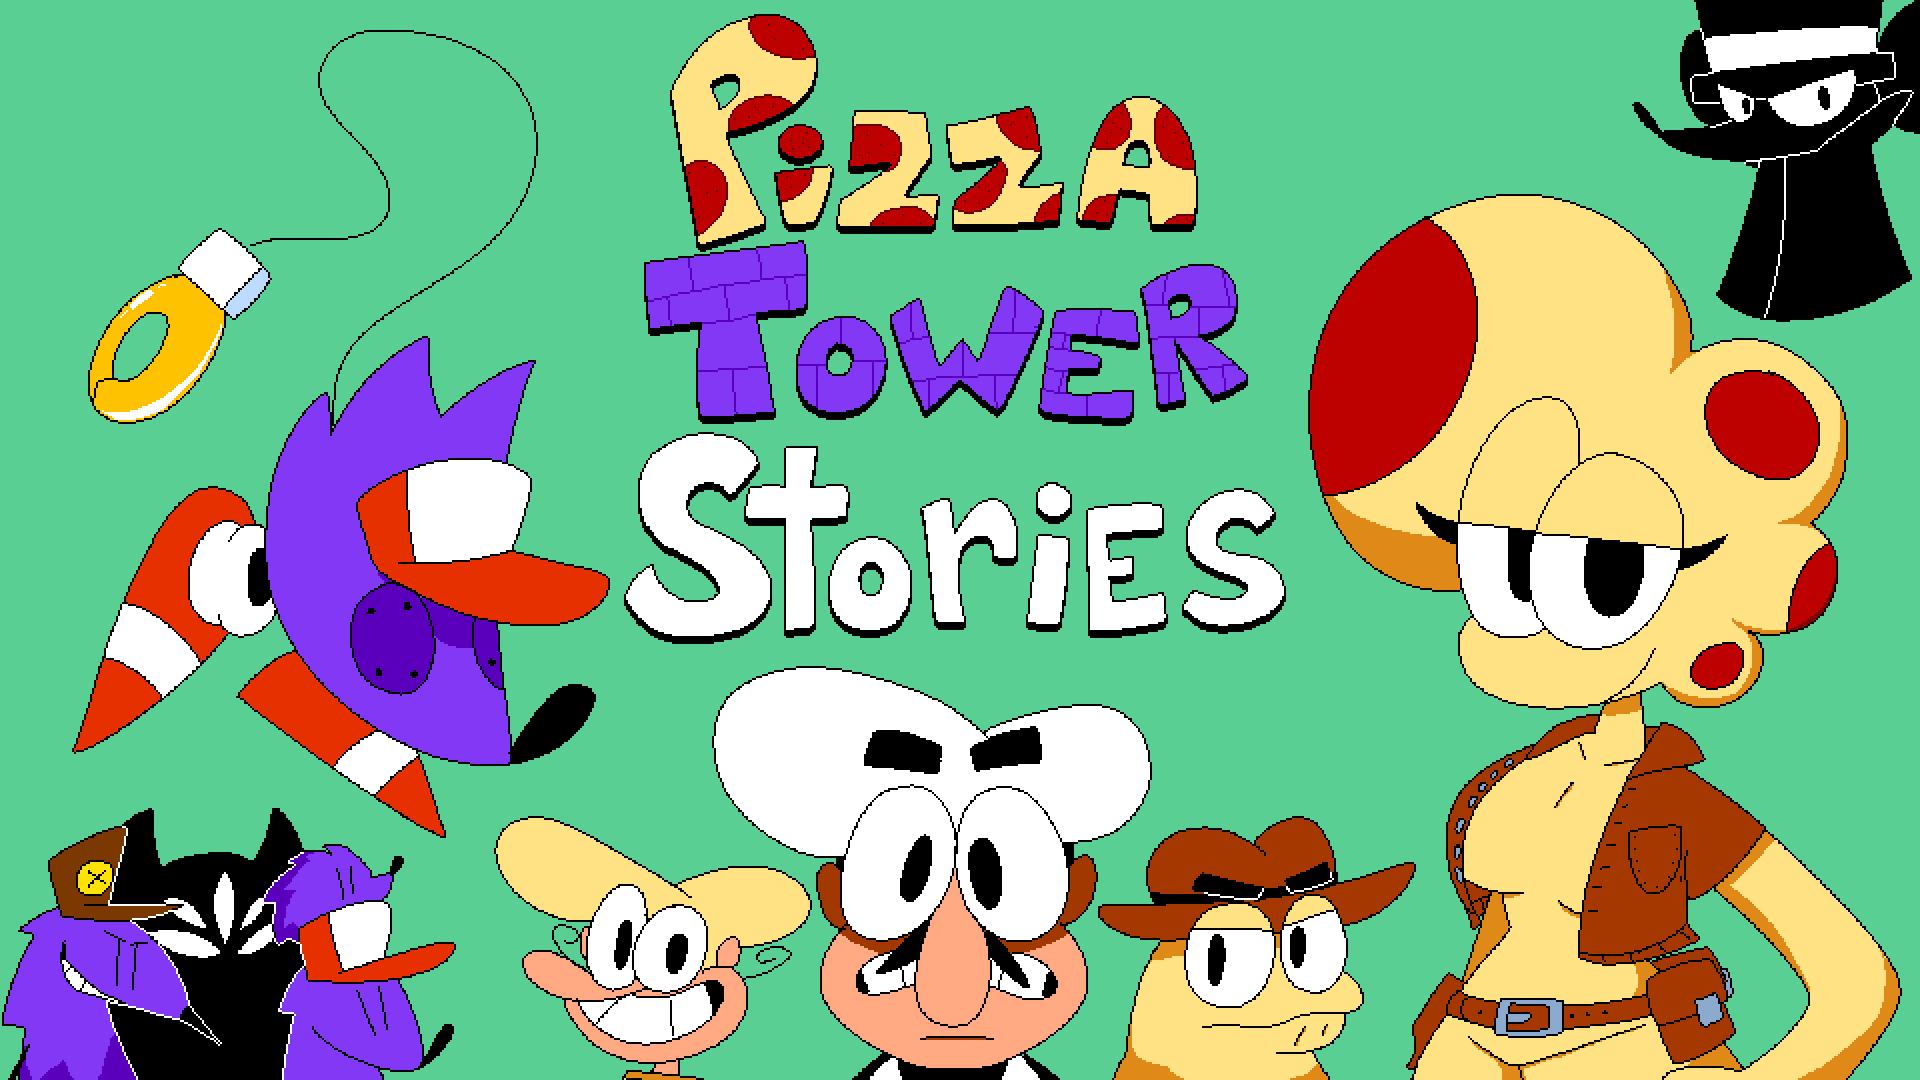 The Pizza Tower Adventure